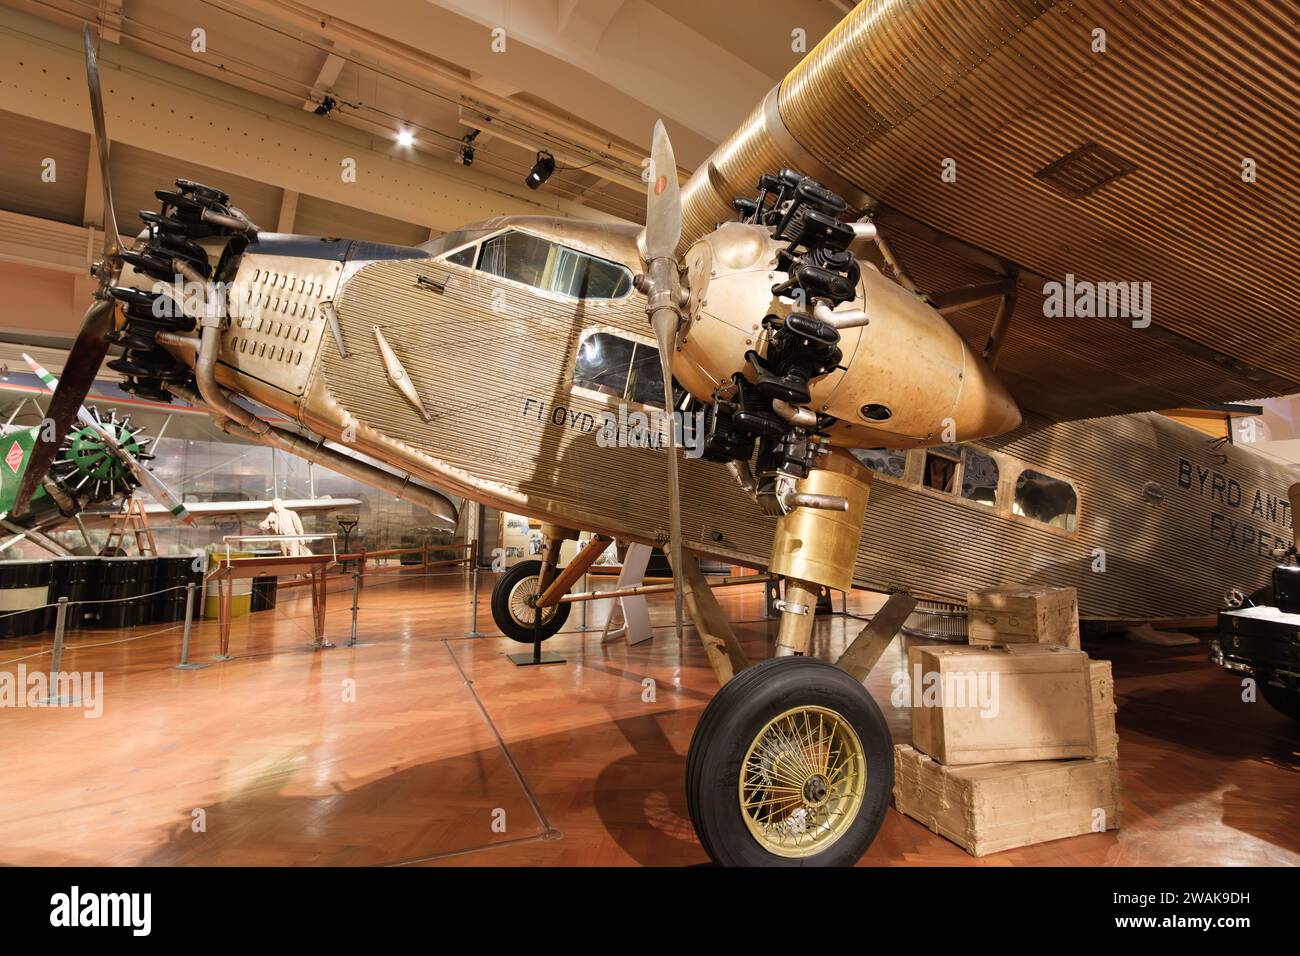 1928 Ford 4-AT-B Tri-Motor airplane, named the Floyd Bennett, on display at the Henry Ford Museum of American Innovation in Dearborn Michigan USA Stock Photo